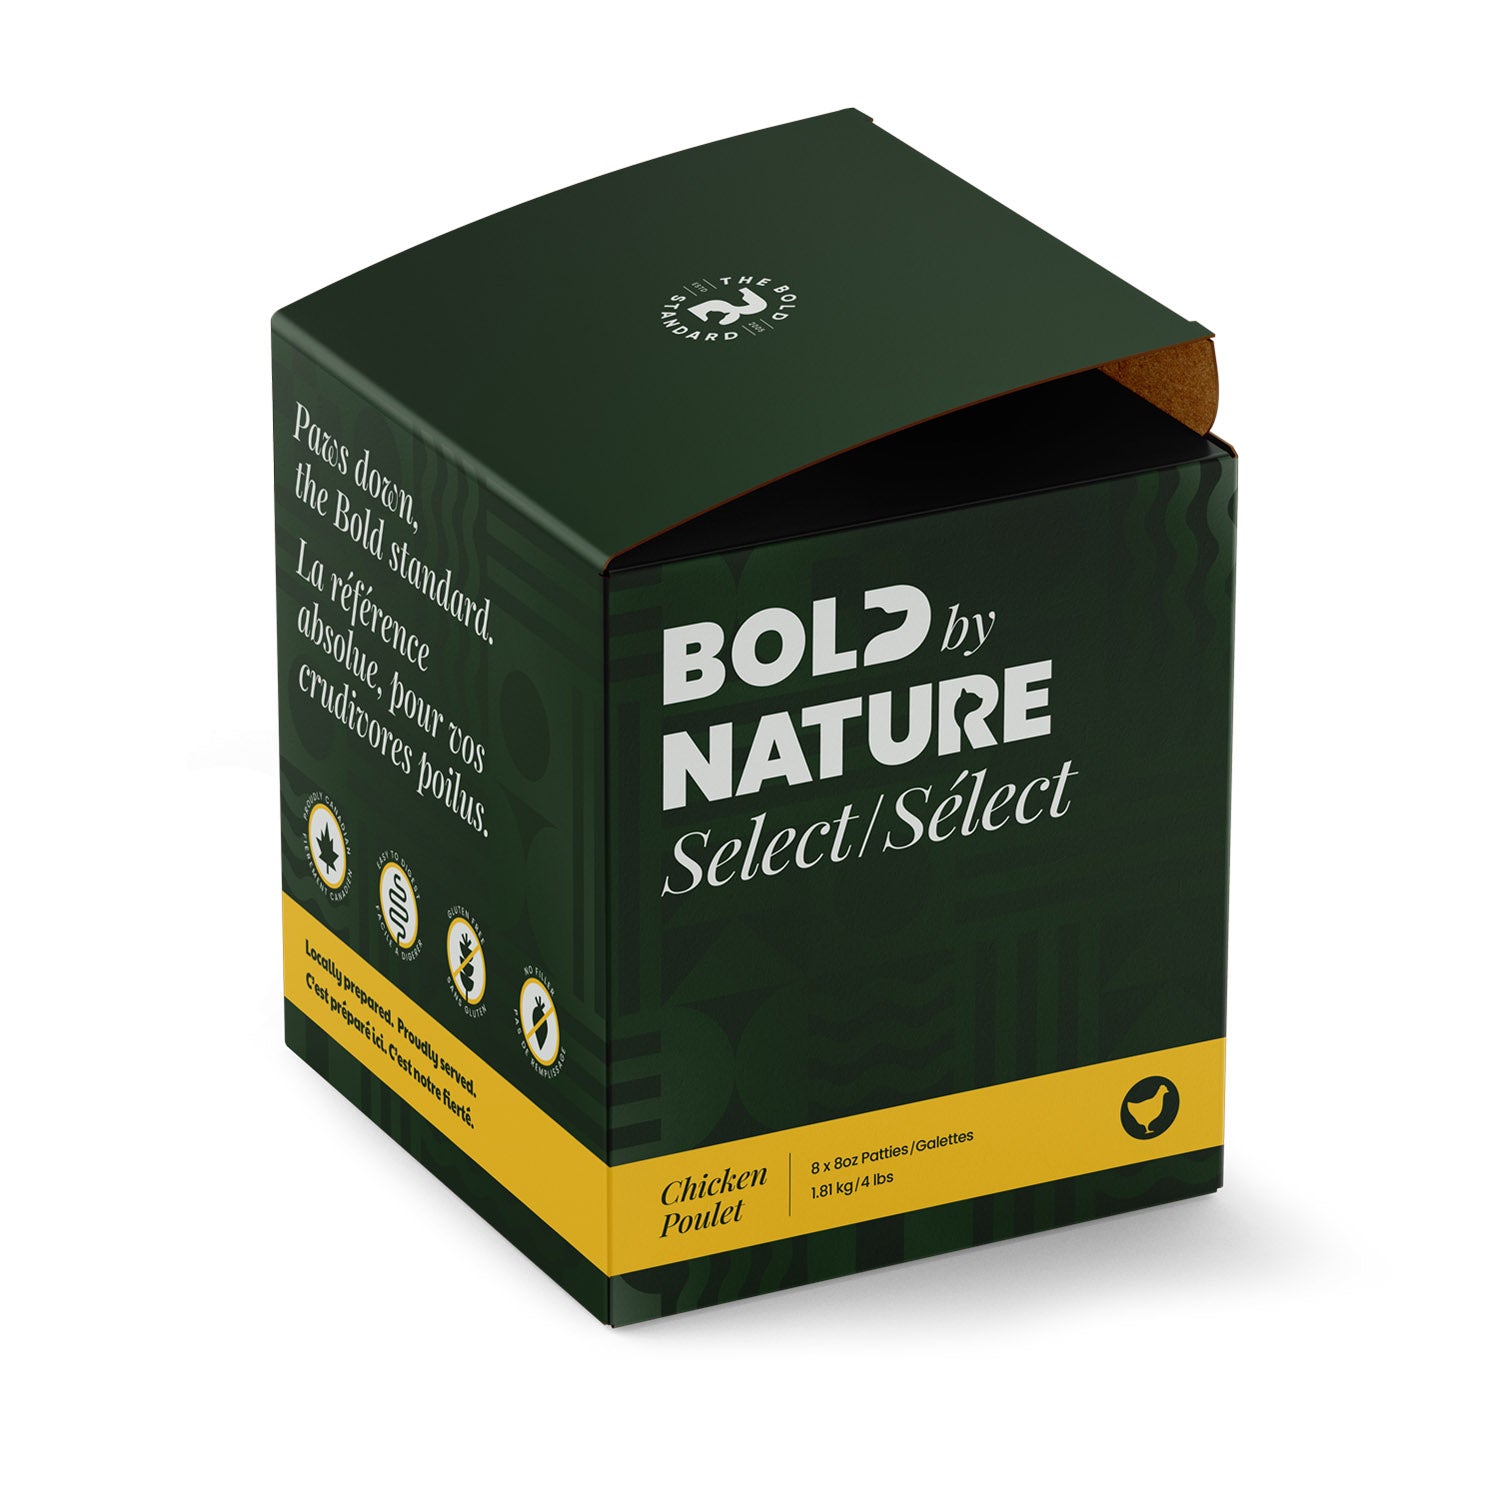 Bold by Nature (Bold Raw) - Select Chicken - Frozen Product